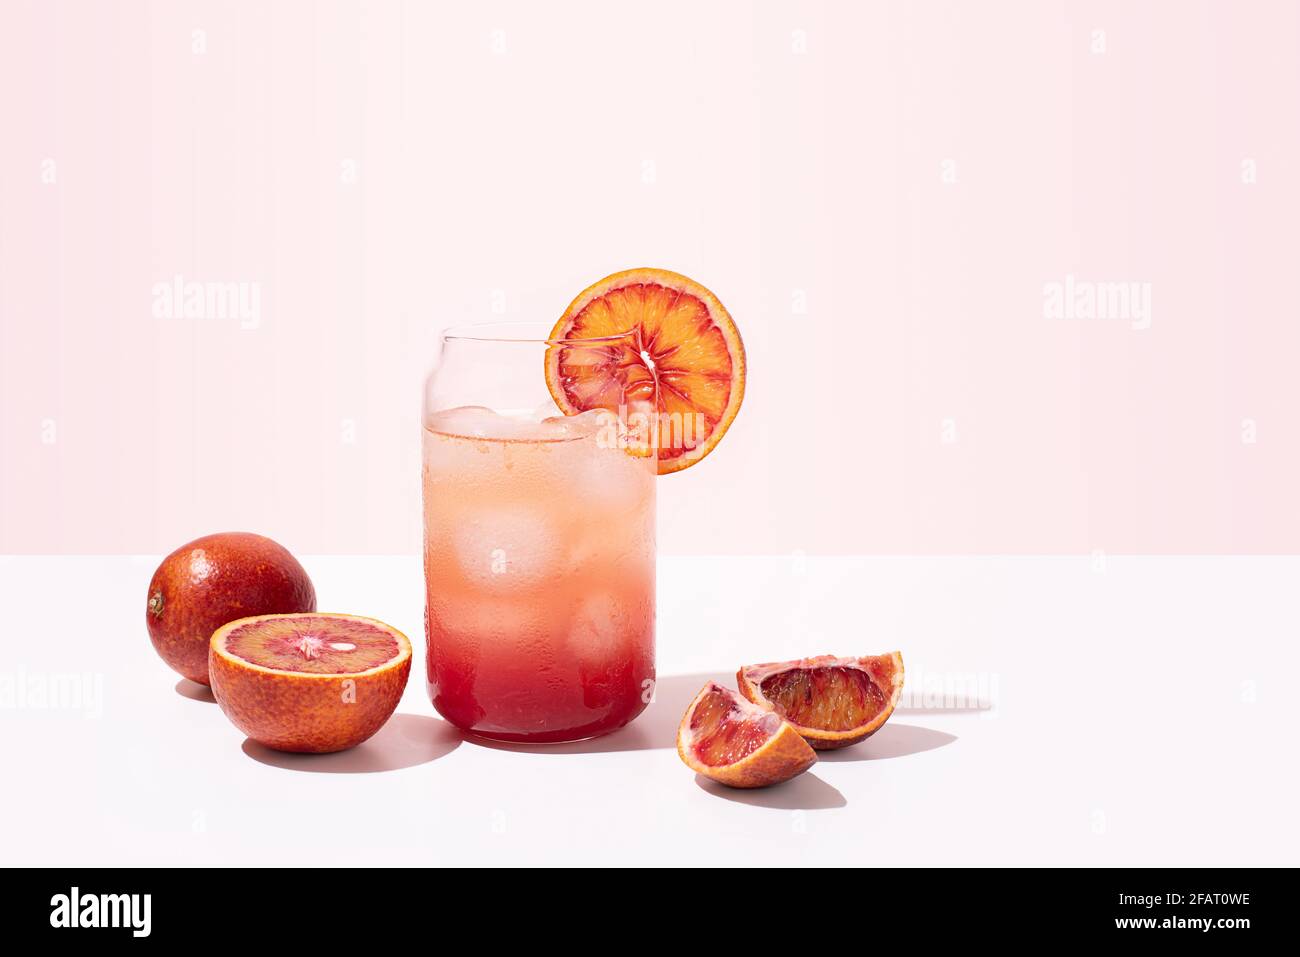 Summer bloody orange lemonade in a glass, healthy functional water on a pink background, close up. Stock Photo